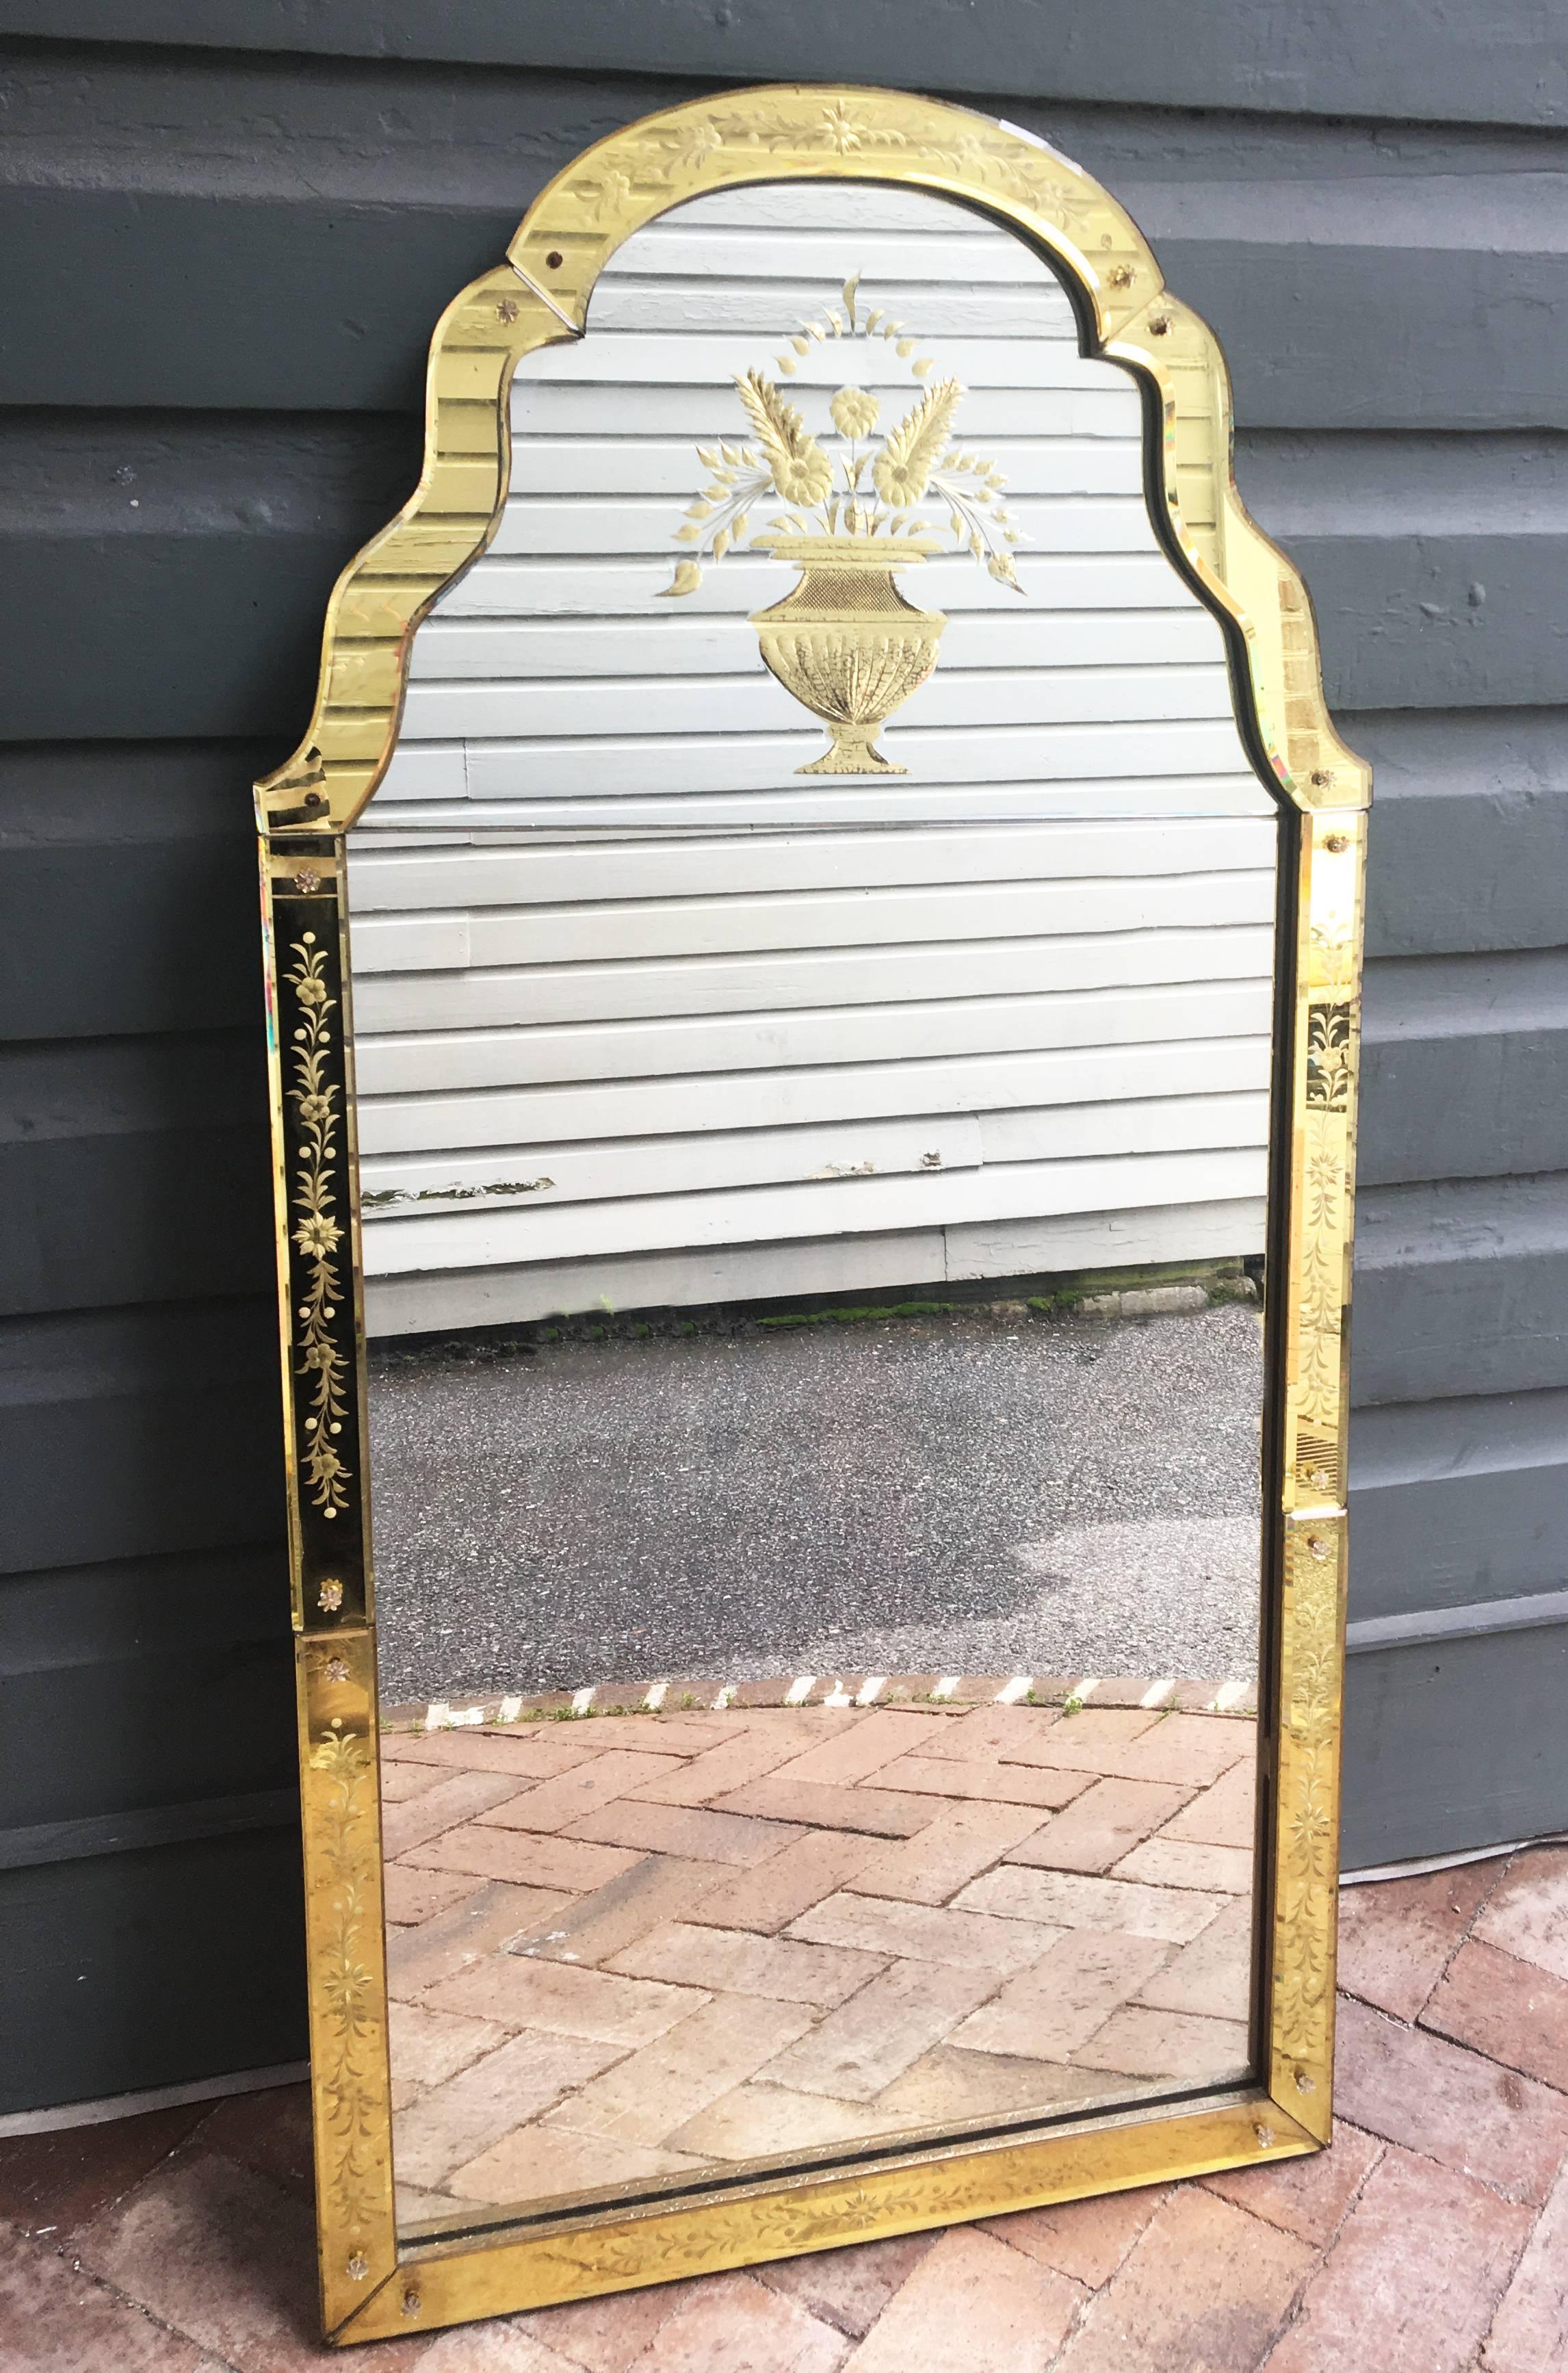 Turn of the century French Art Deco mirror with beautiful citrine colored glass etched and beveled frame. Citrine colored urn with flowers gives this mirror a unique look.